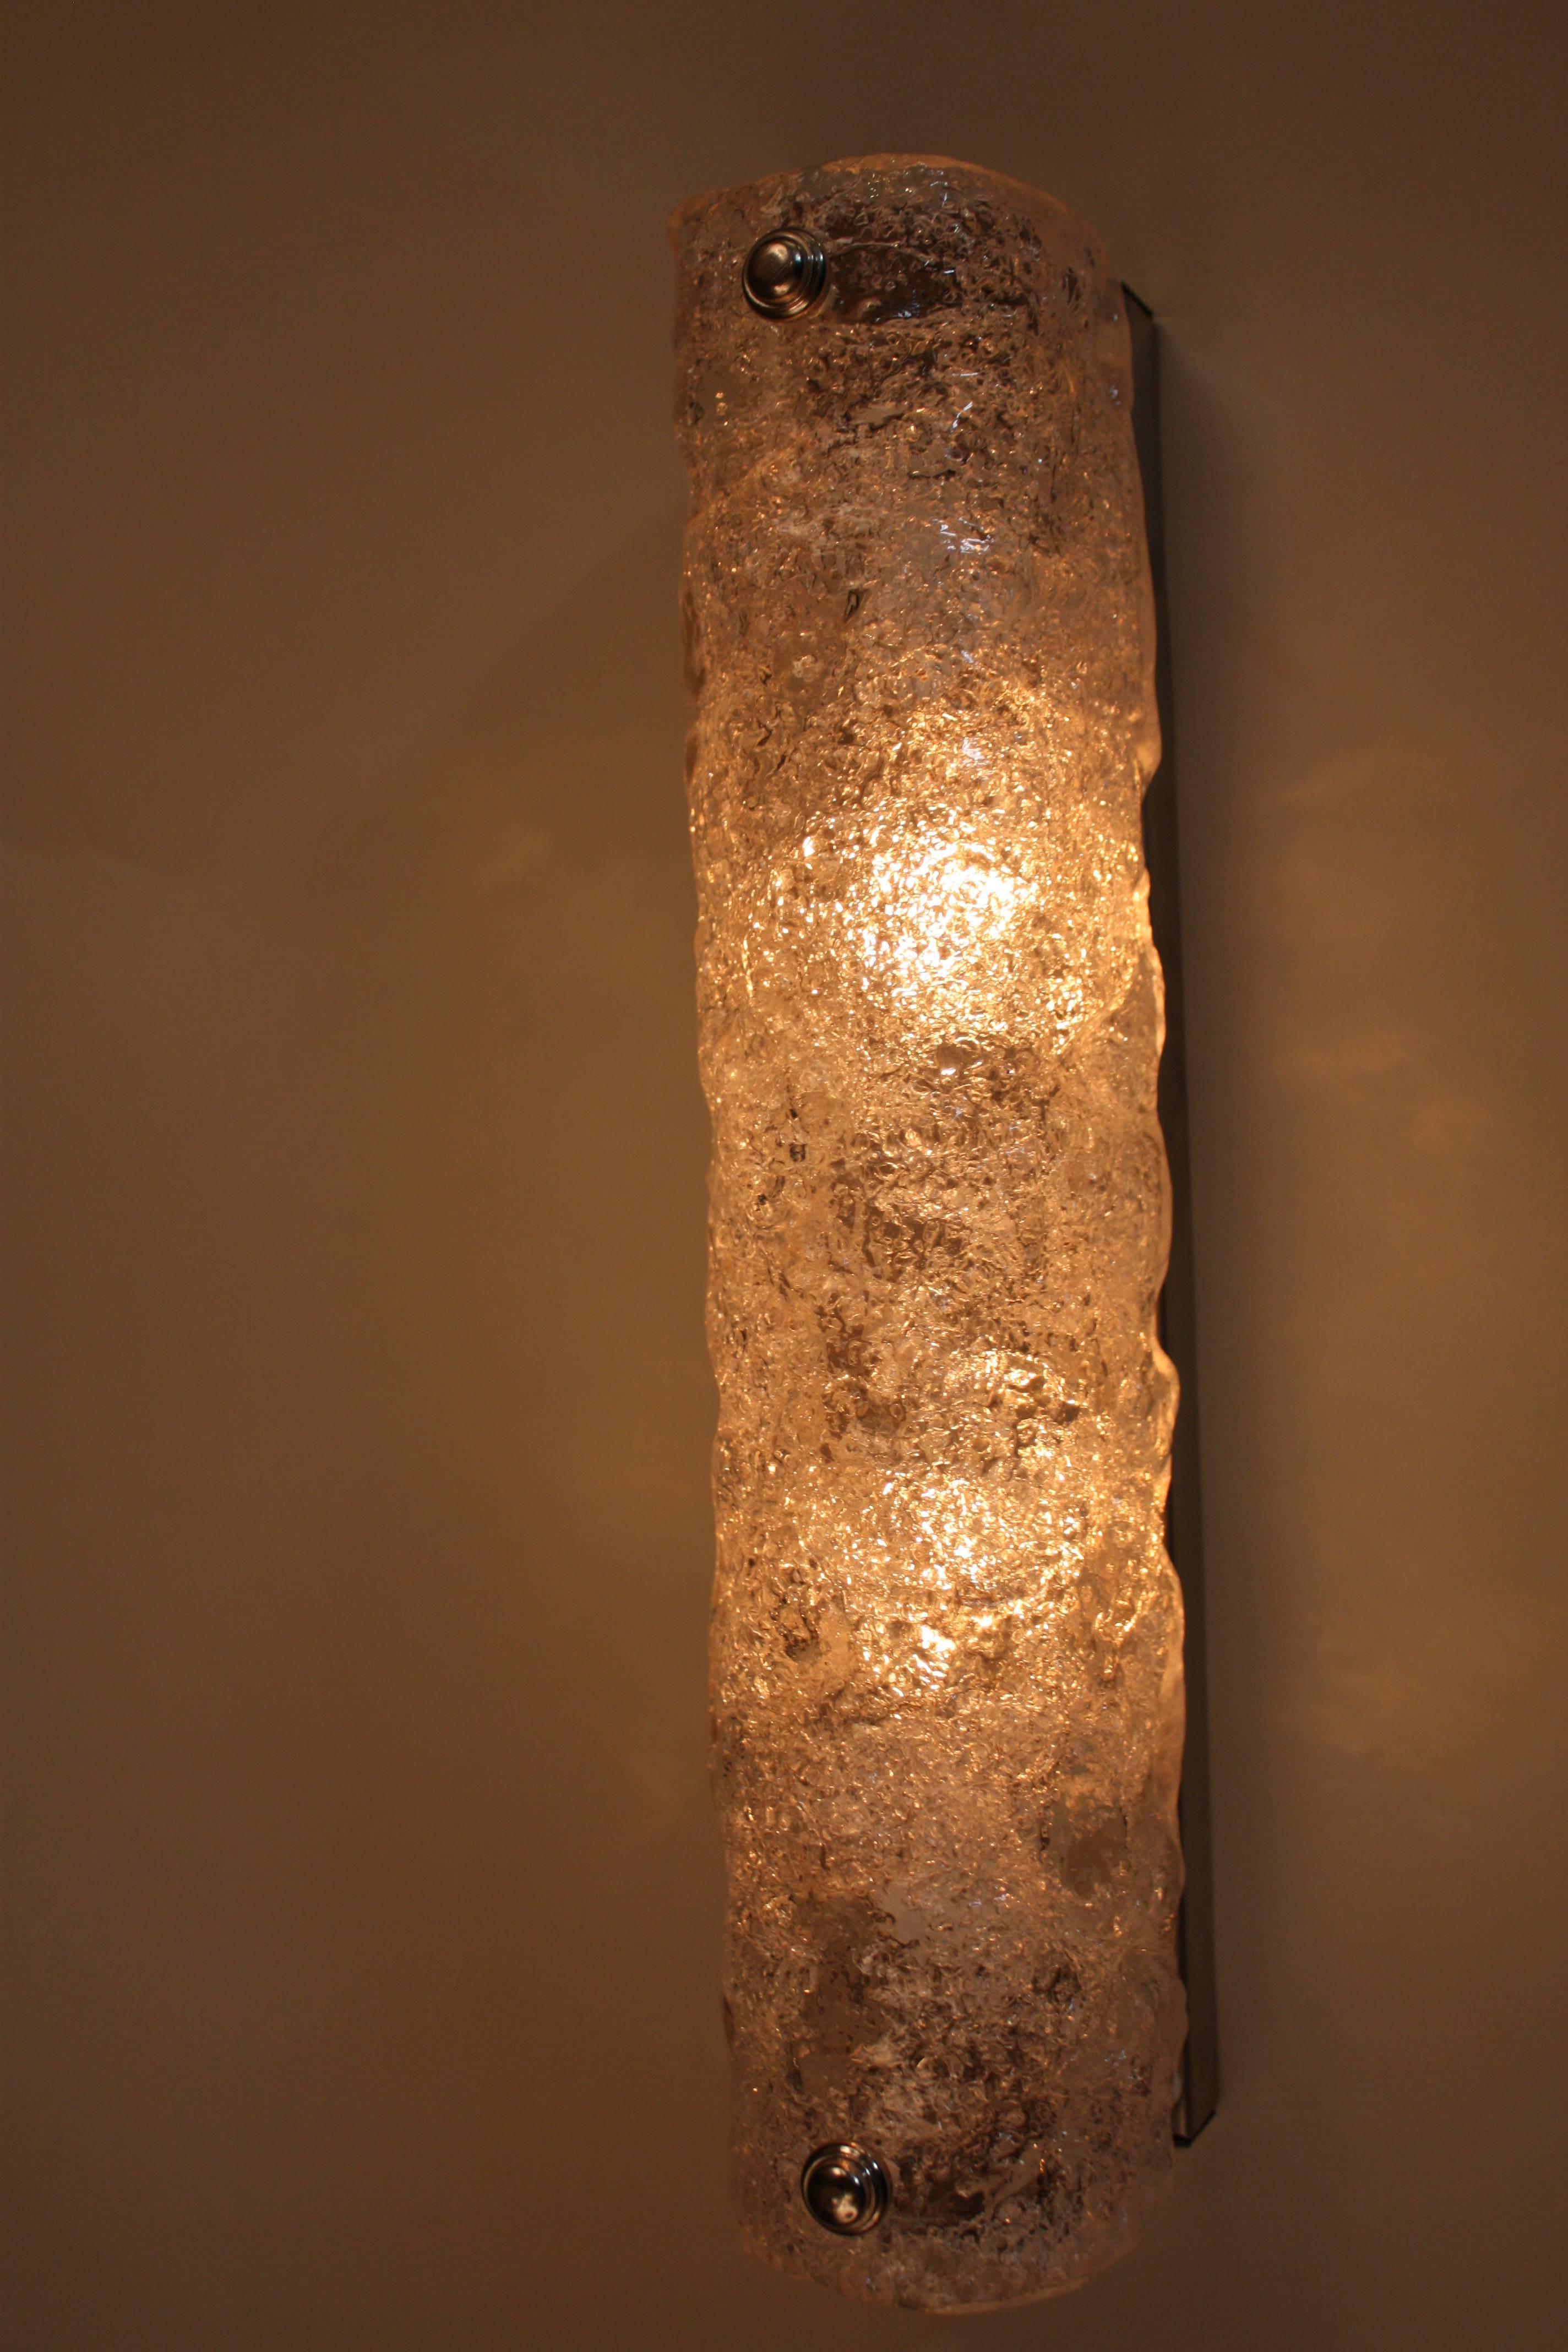 Double light textured glass, stainless steel wall sconces by Uginox.
These wall sconces can be mounted vertical or horizontal.